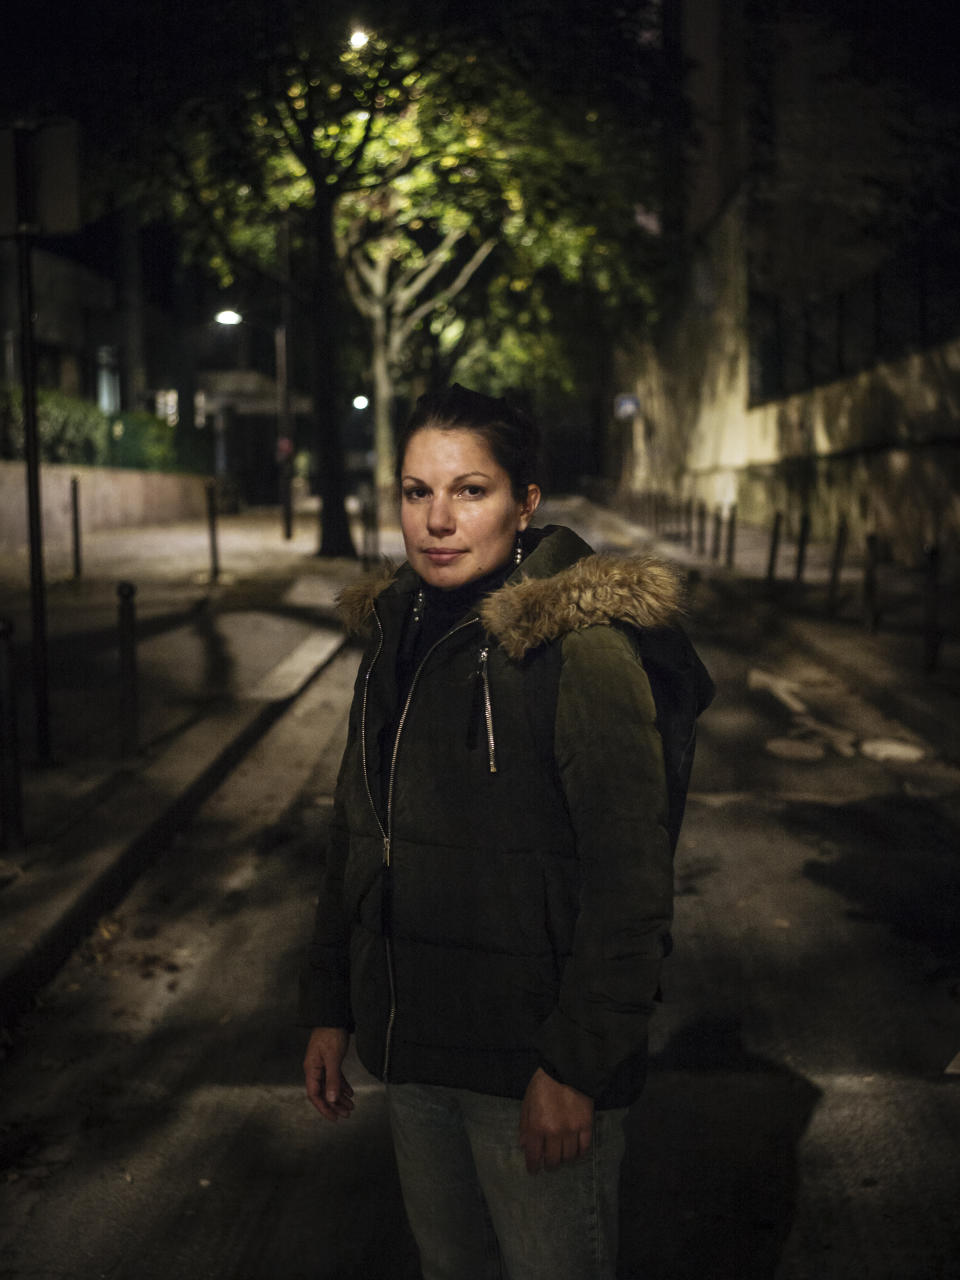 Mathilde, 31, a jewelry student from Marseille, poses for a portrait in Paris. Mathilde experienced domestic violence when she was 21. Ten years later, she finally took back control of her life. Pasting is for her the way not to be a victim anymore and take back control of her fear. (Photo: Kamil Zihnioglu/AP)